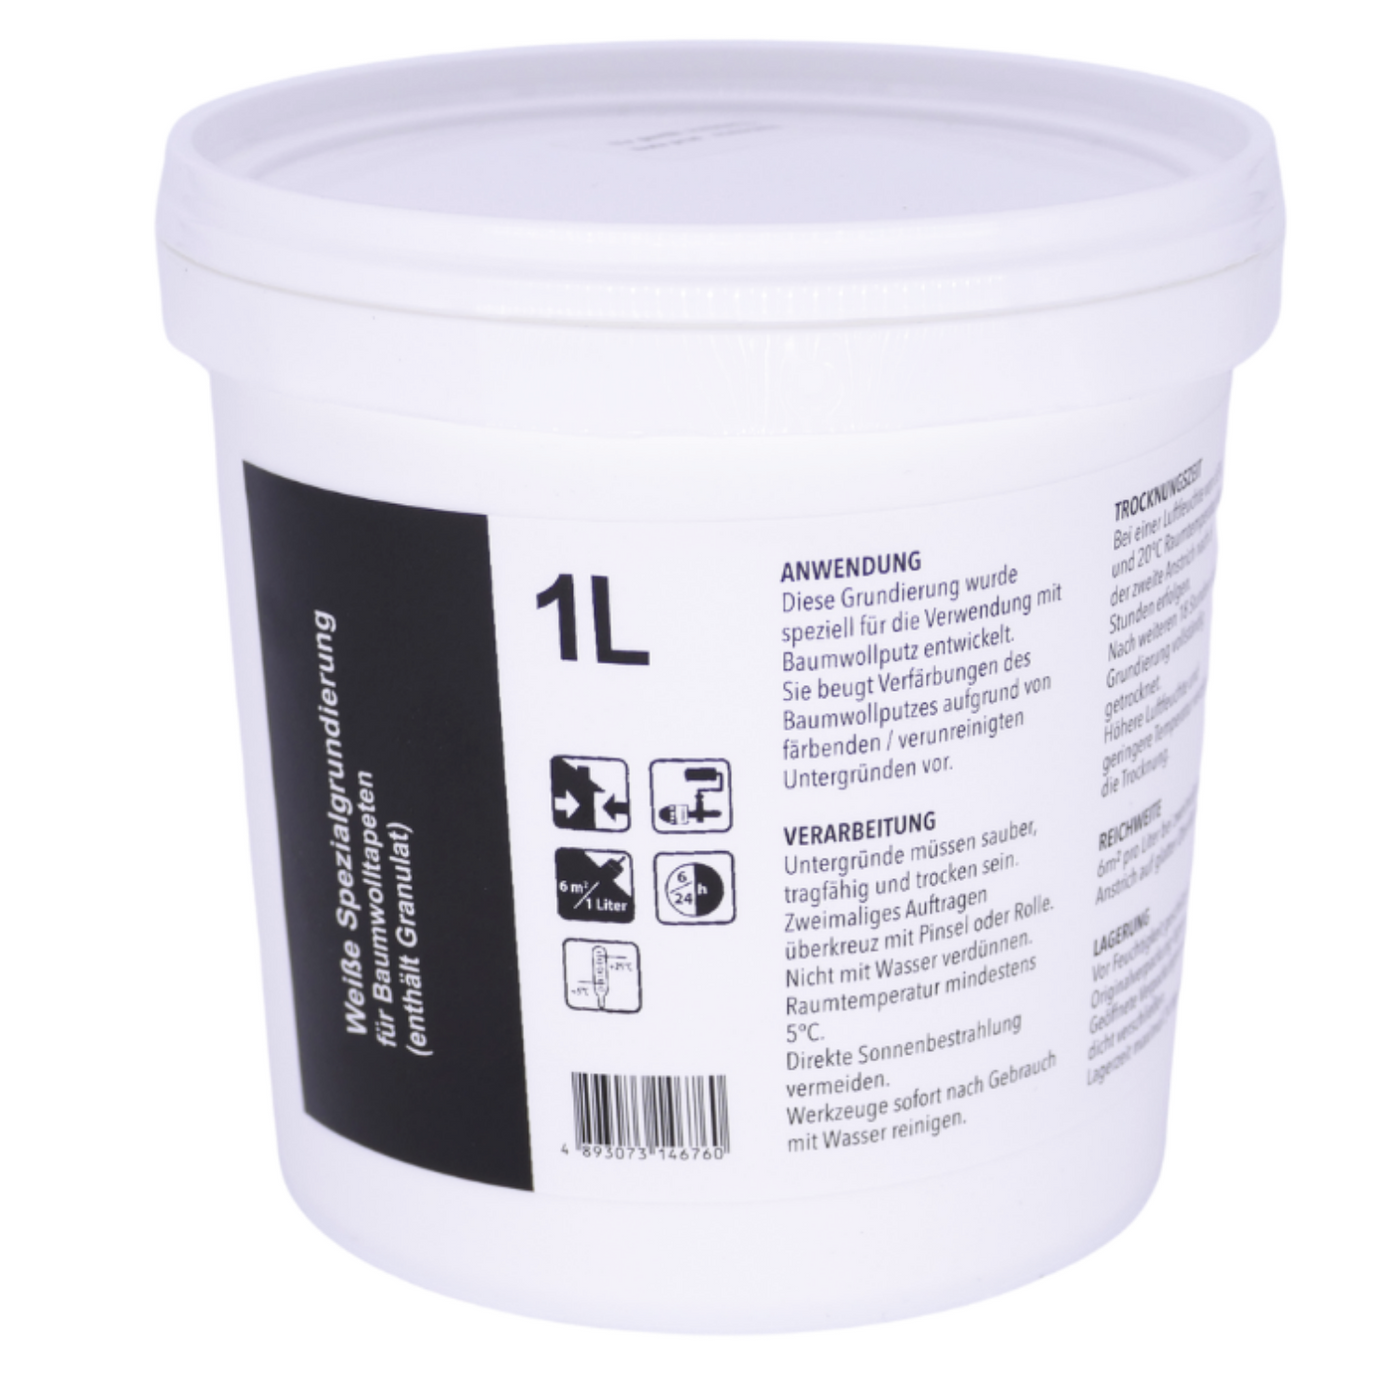 1 liter insulating paint with granules for cotton plaster (coverage of up to 6 m² on a non-absorbent surface)